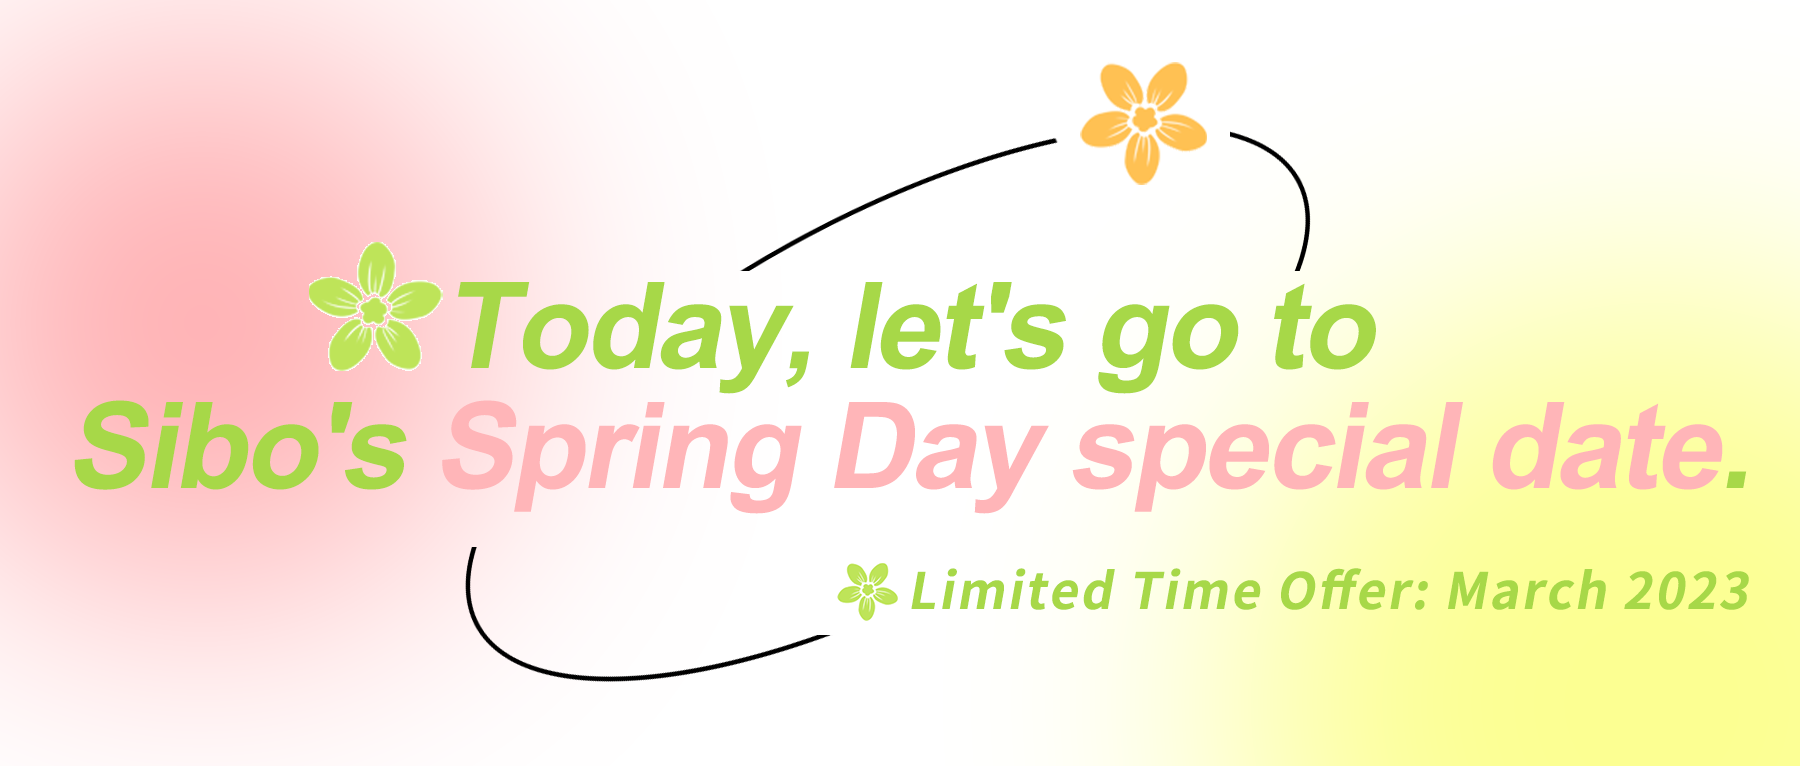 Today, let's go to Sibo's Spring Day special date.